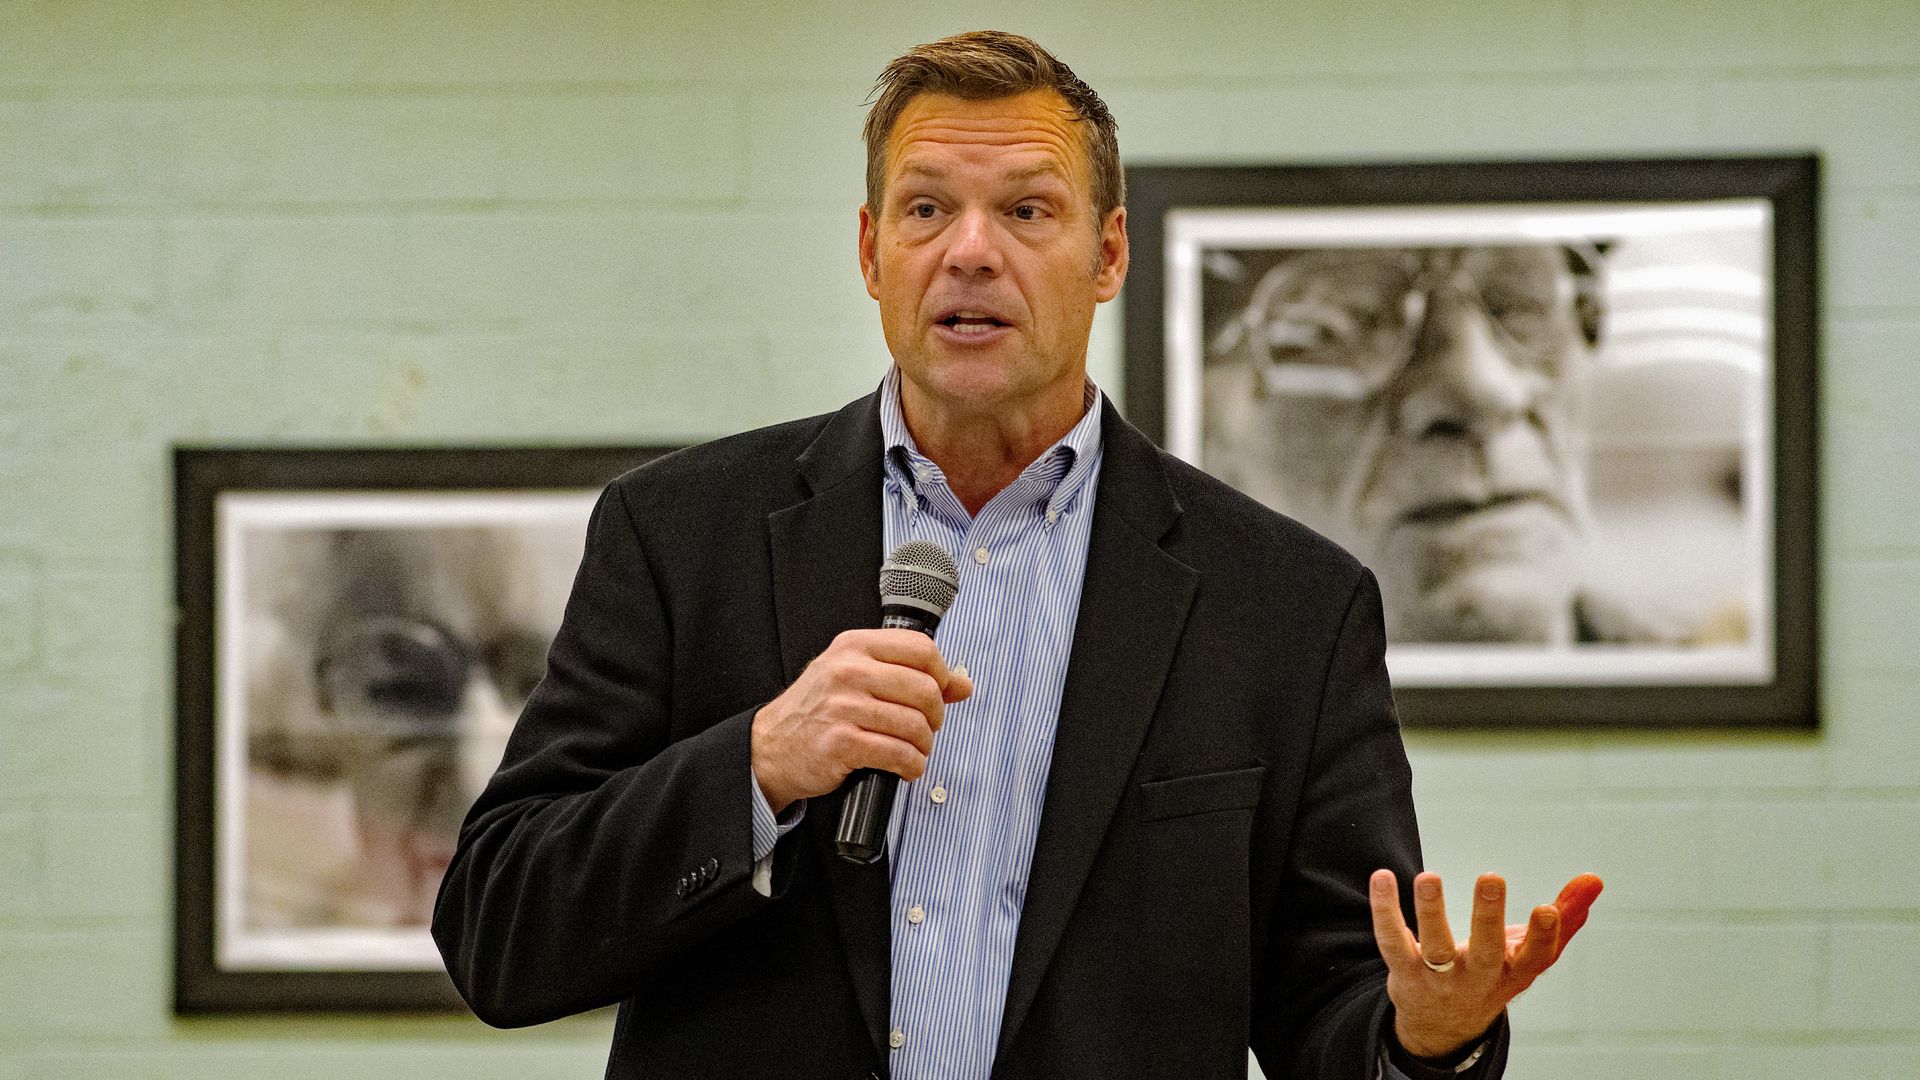 Kobach holds a microphone and wears a suit 